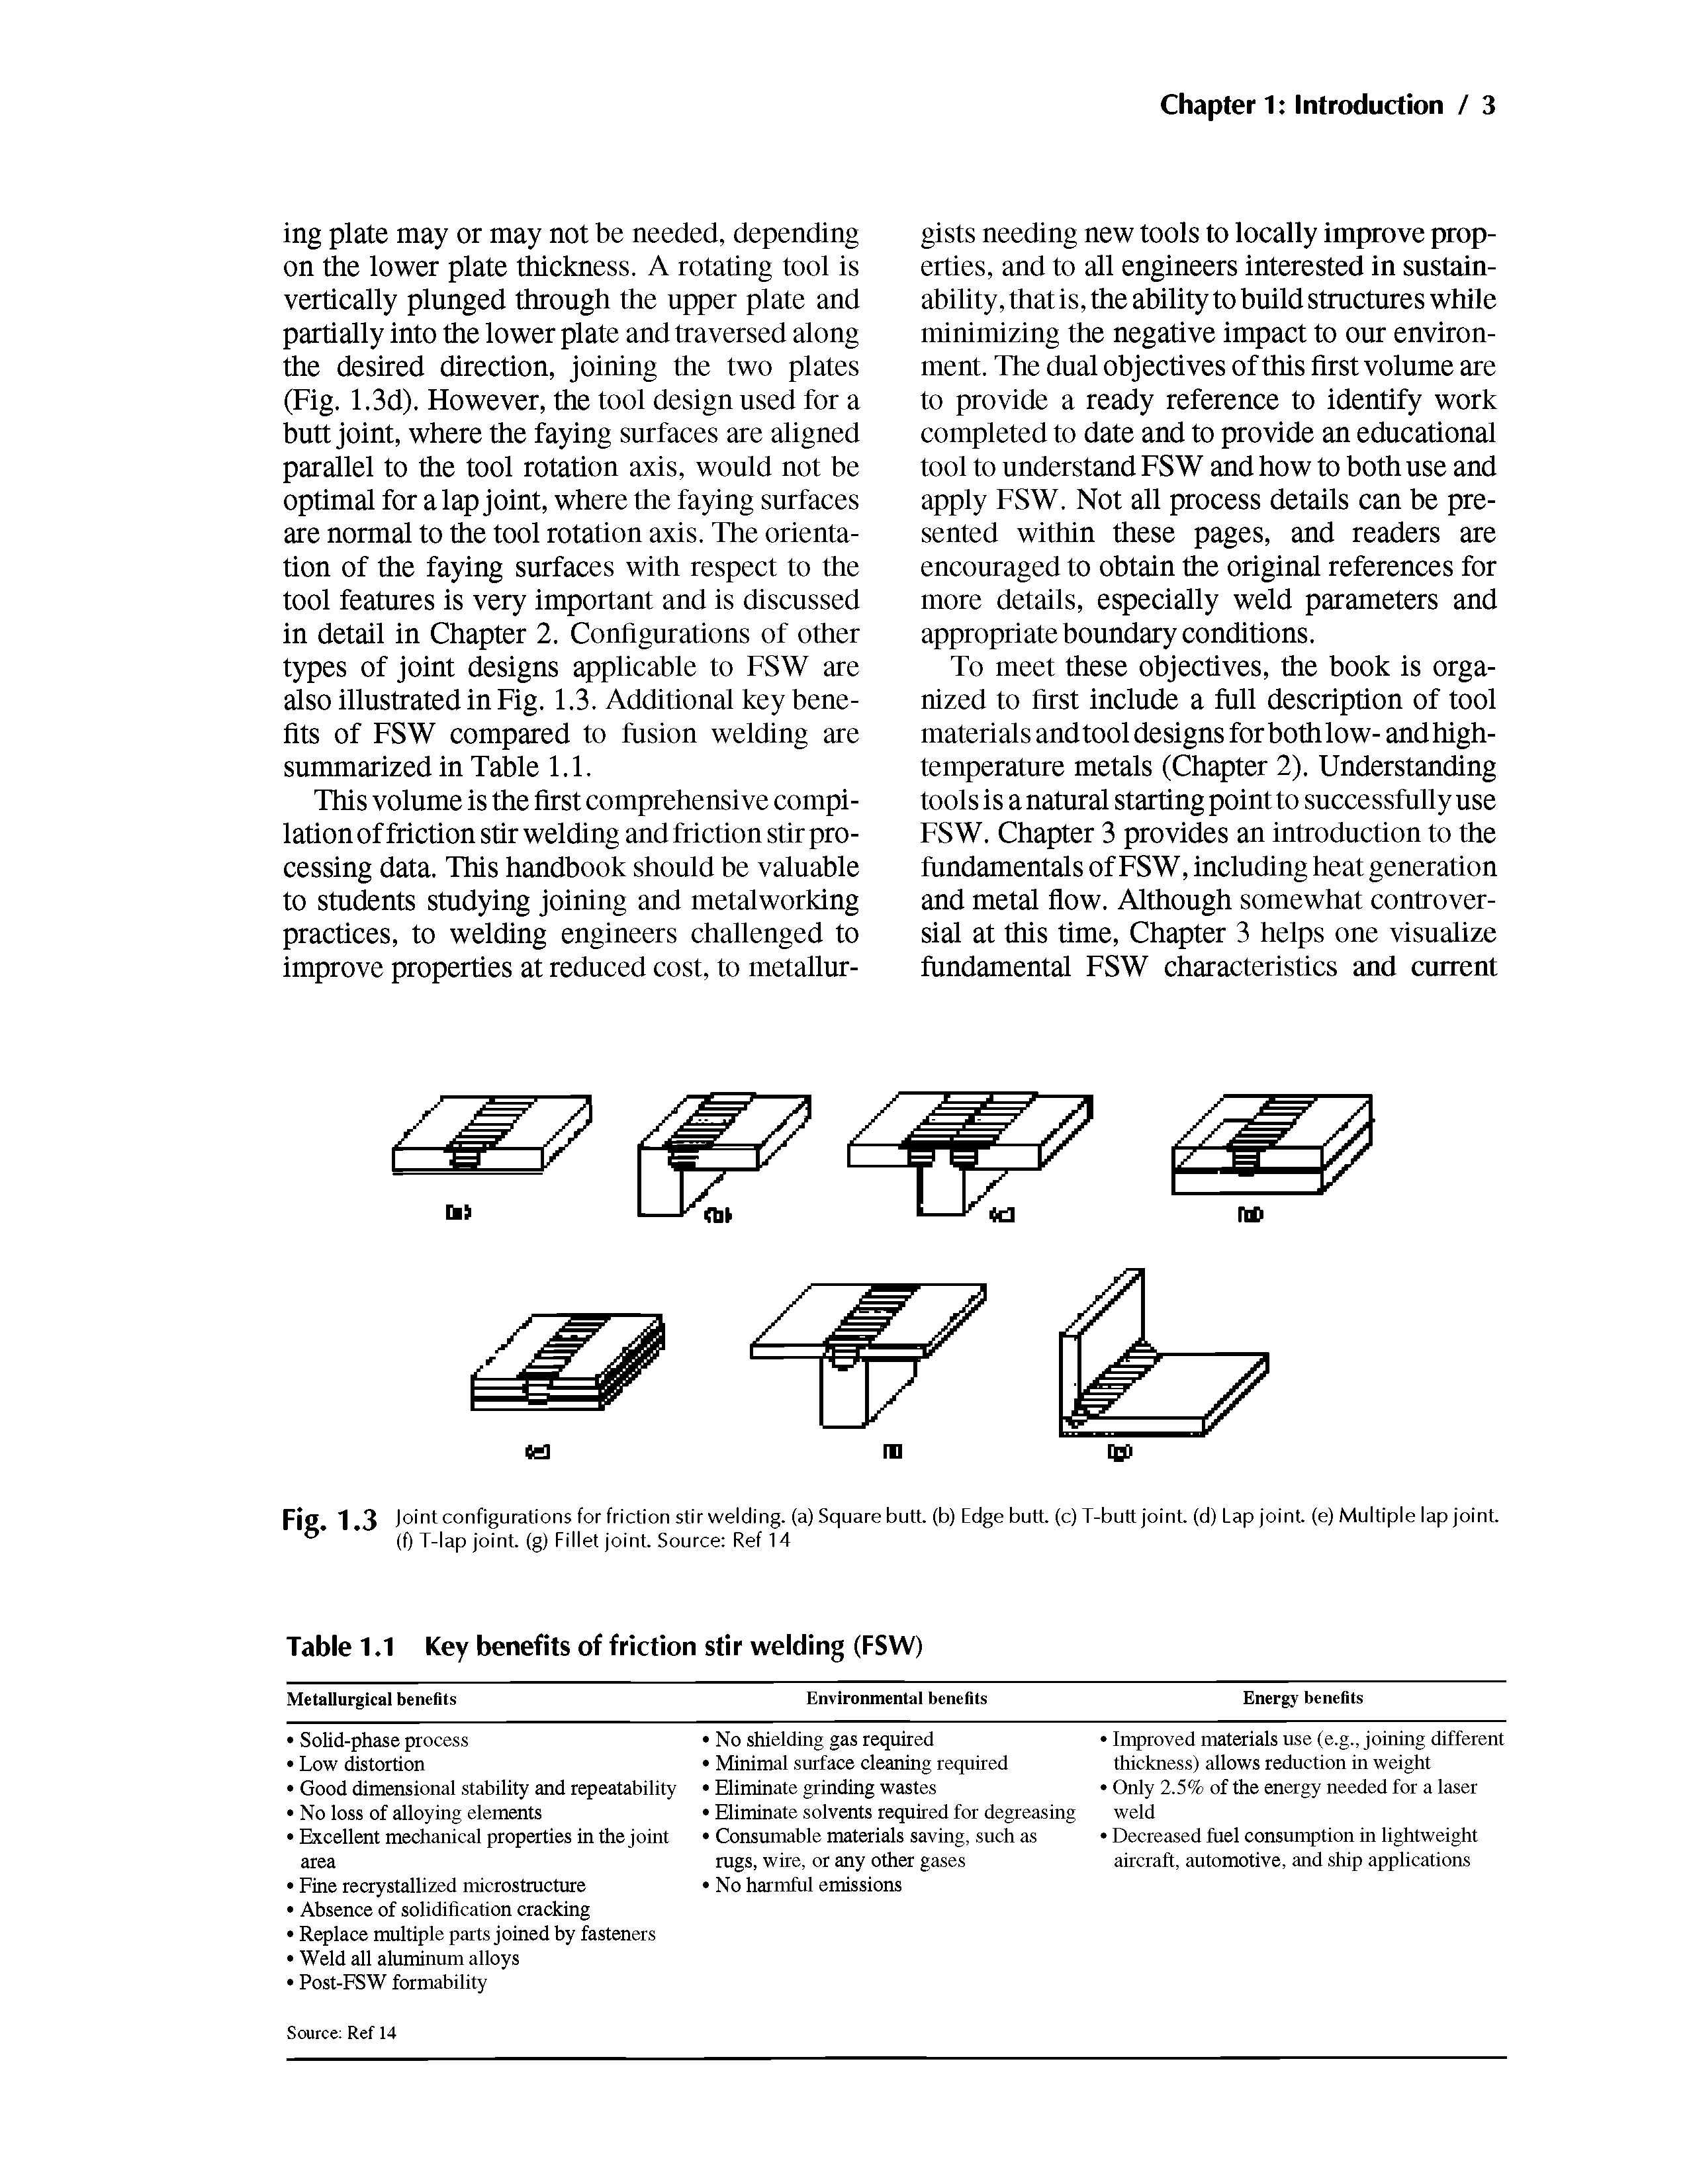 Fig. 1.3 Joint configurations for friction stir welding, (a) Square butt, (b) Edge butt, (c) T-butt joint, (d) Lap joint, (e) Multiple lap joint. (f) T-lap joint, (g) Fillet joint. Source Ref 14...